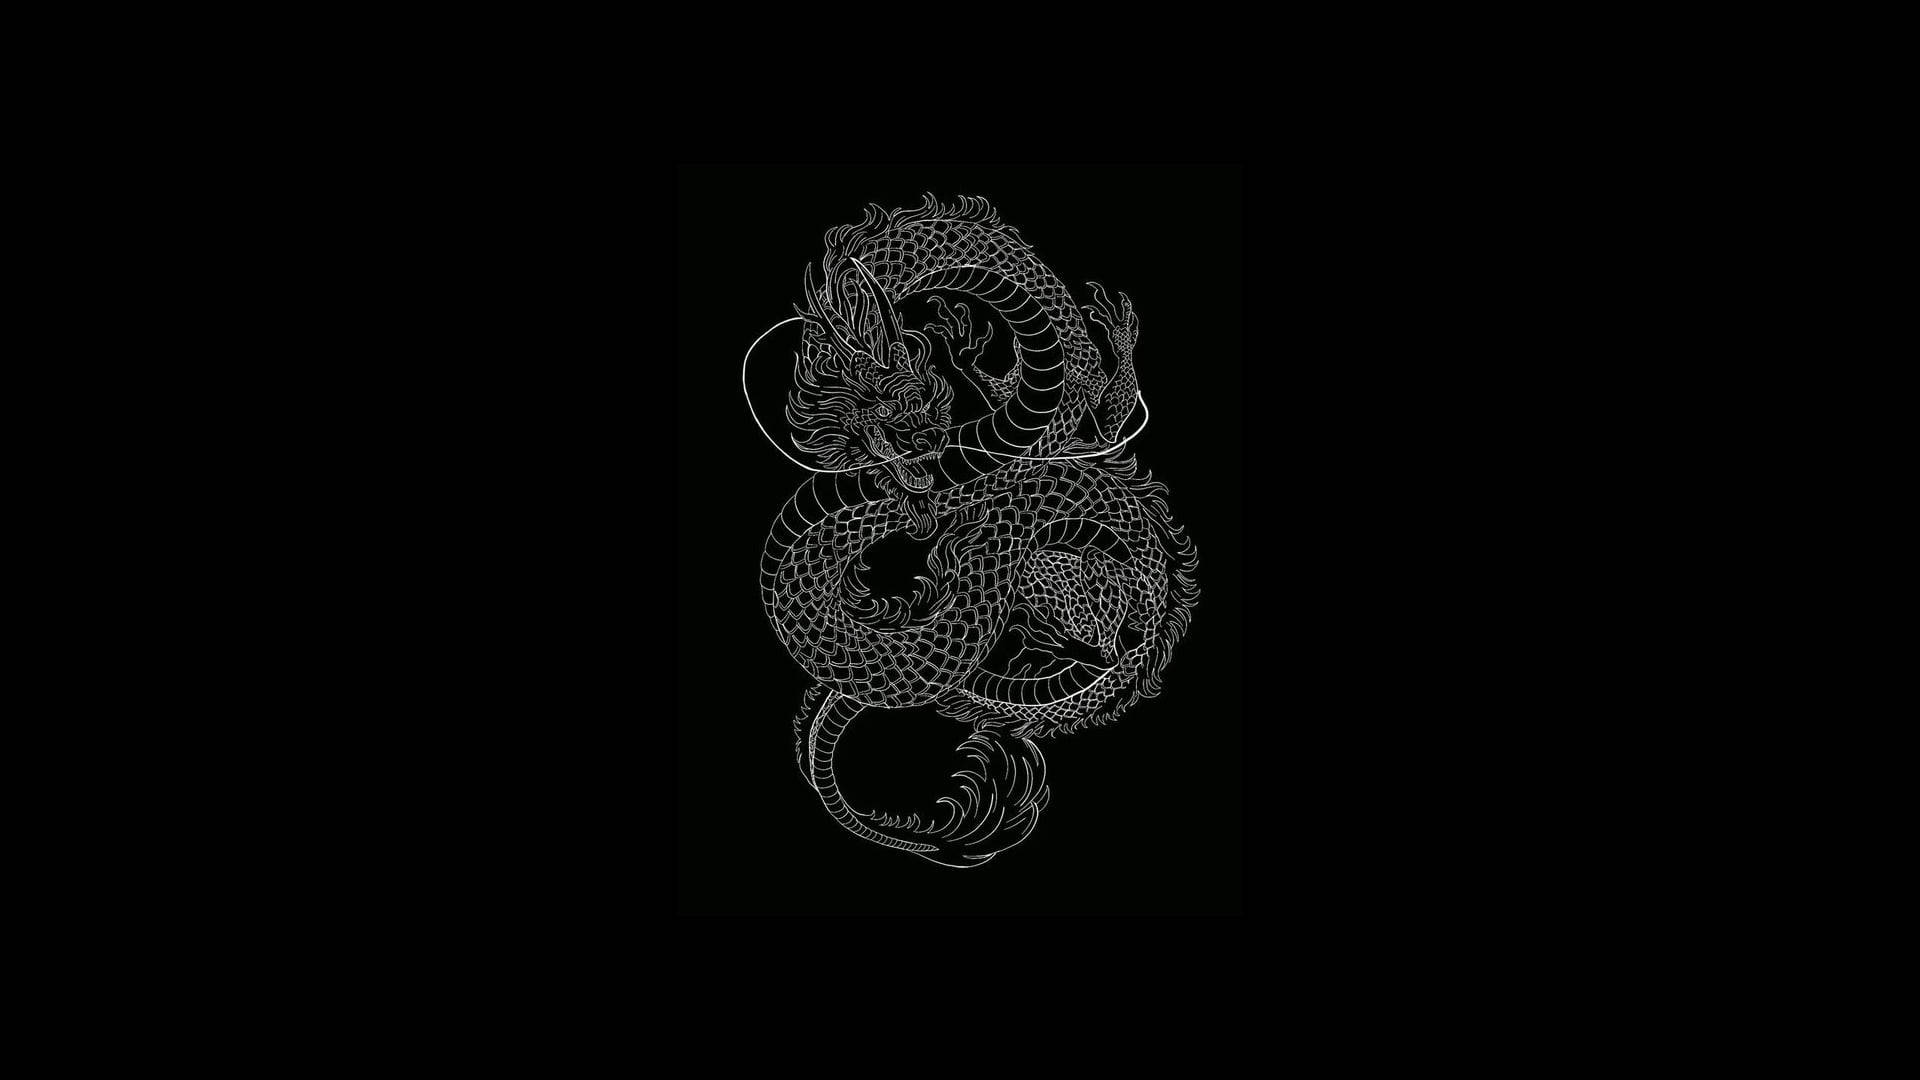 A black and white drawing of two snakes - Dragon